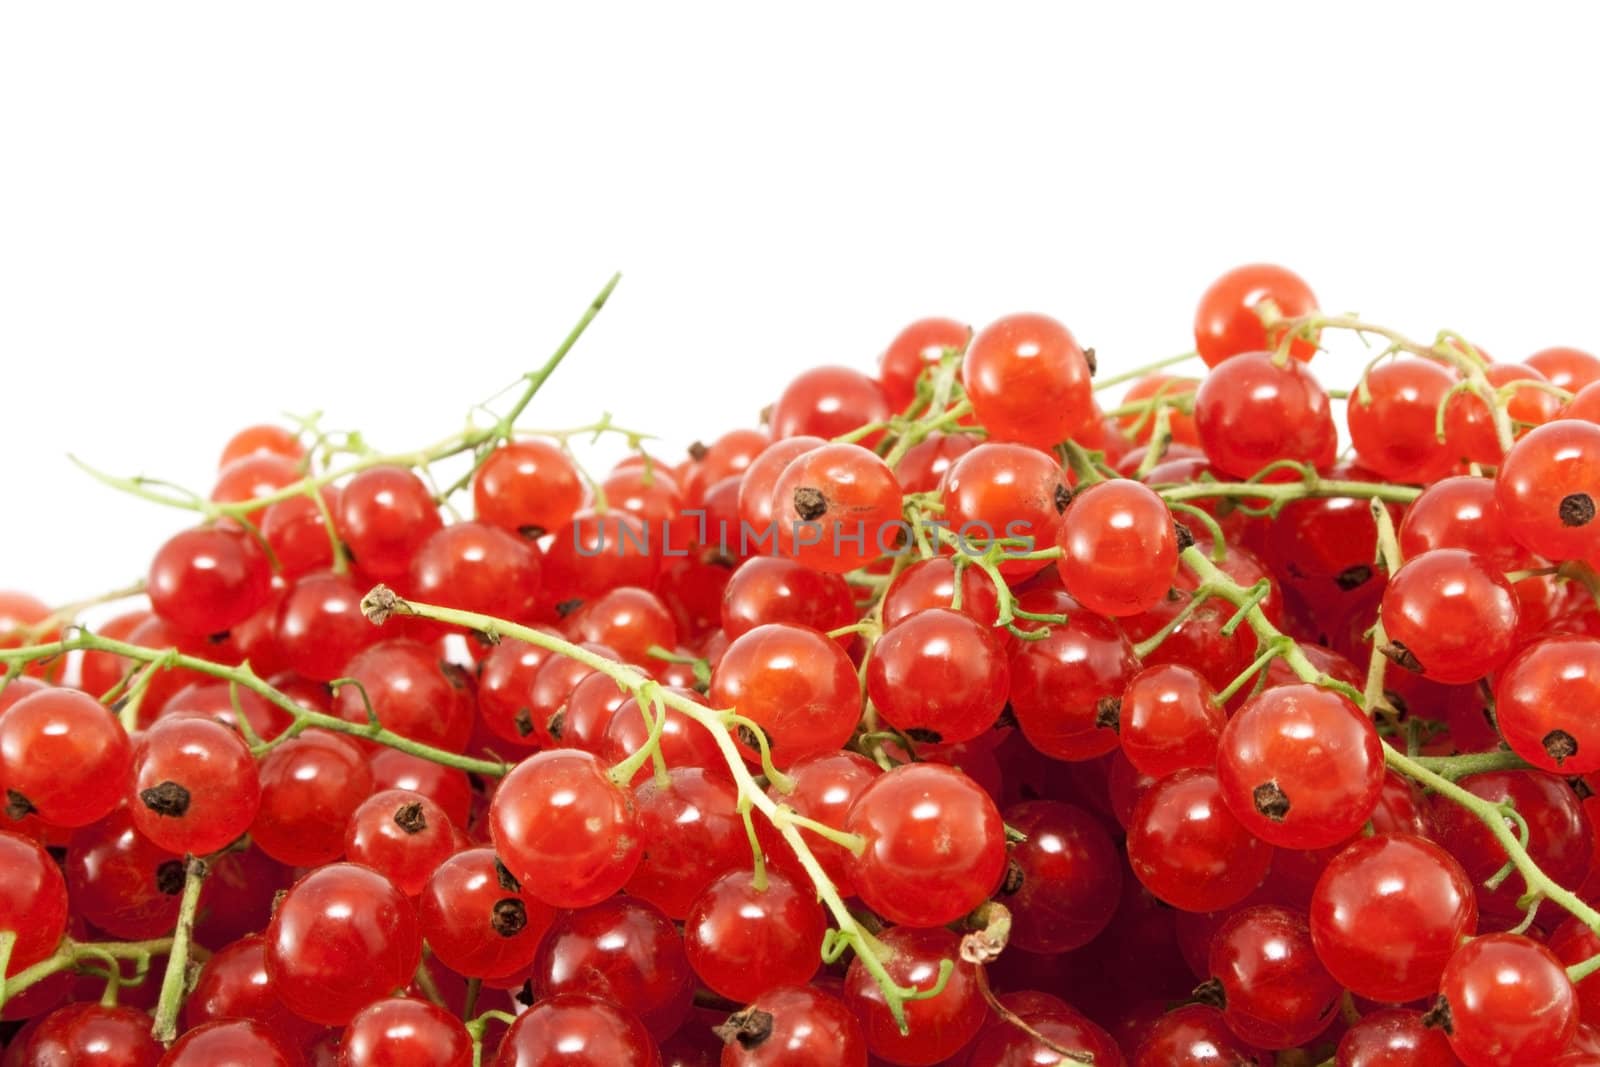 Red currant by magraphics